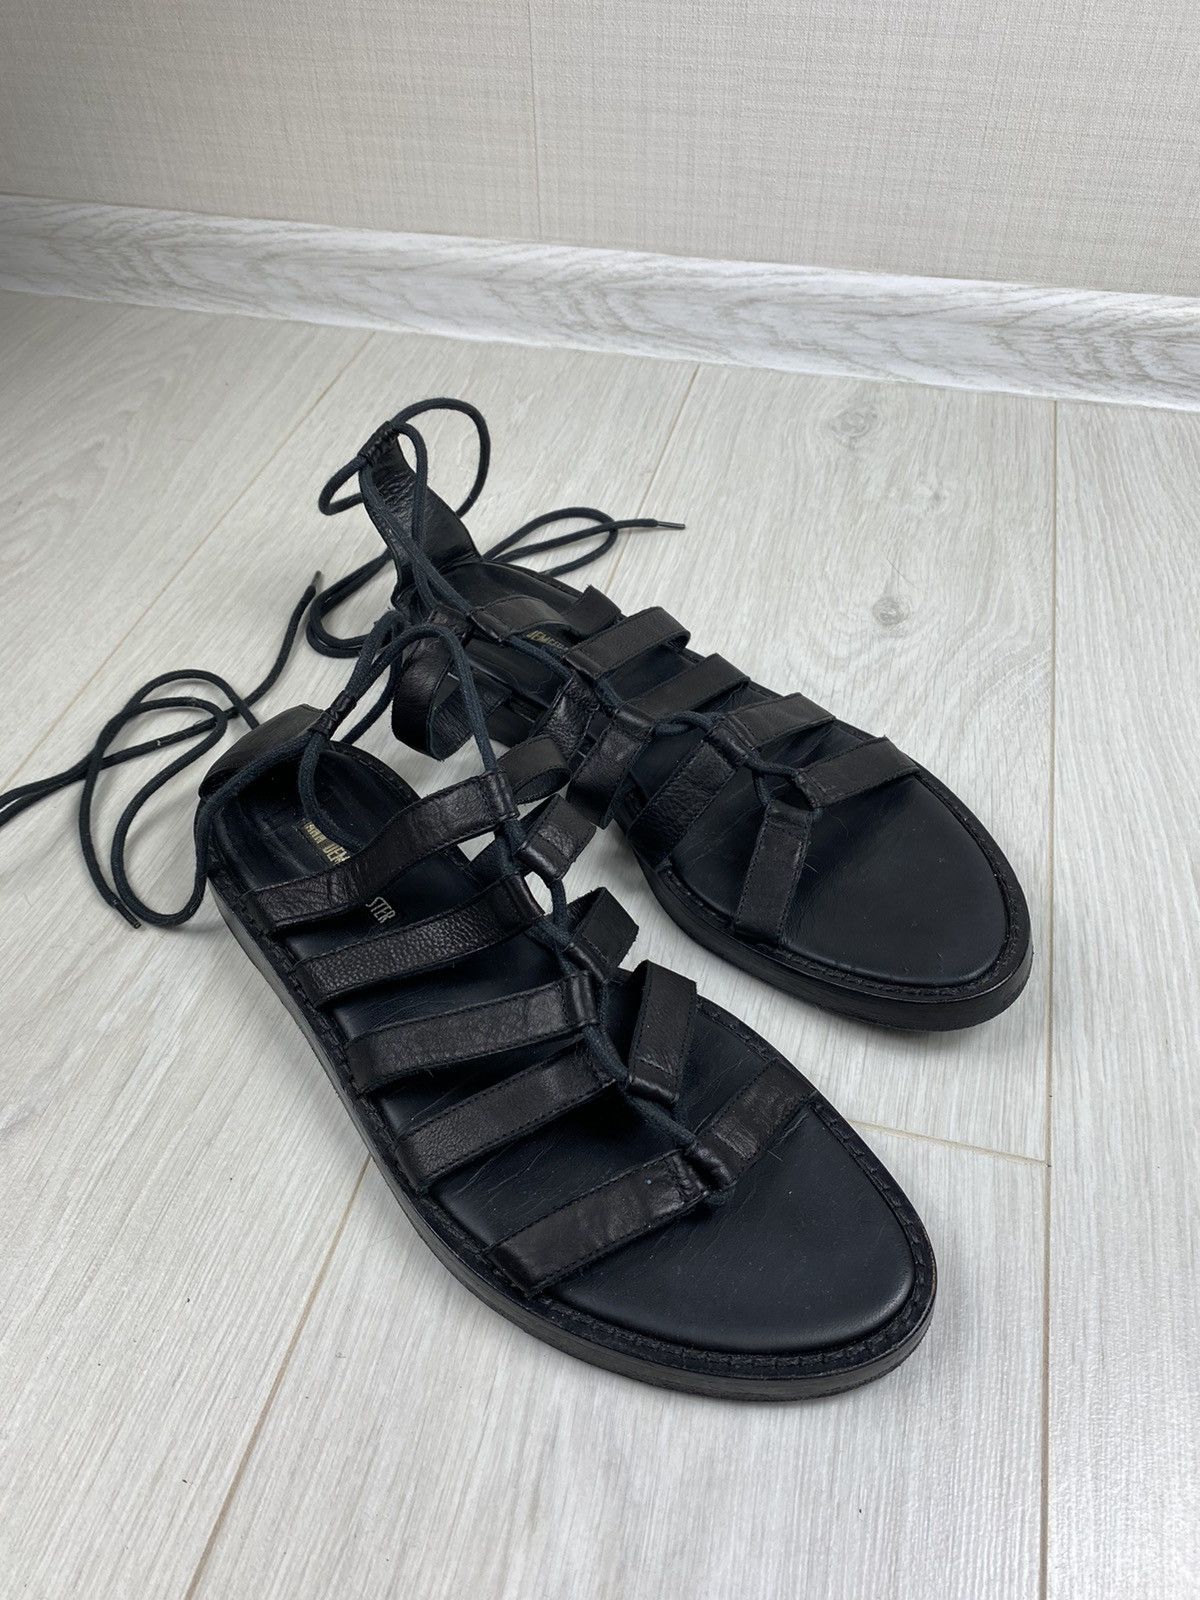 Vintage Ann Demeulemeester Leather Flat Gladiator Sandals High Size US 9 / EU 42 - 1 Preview